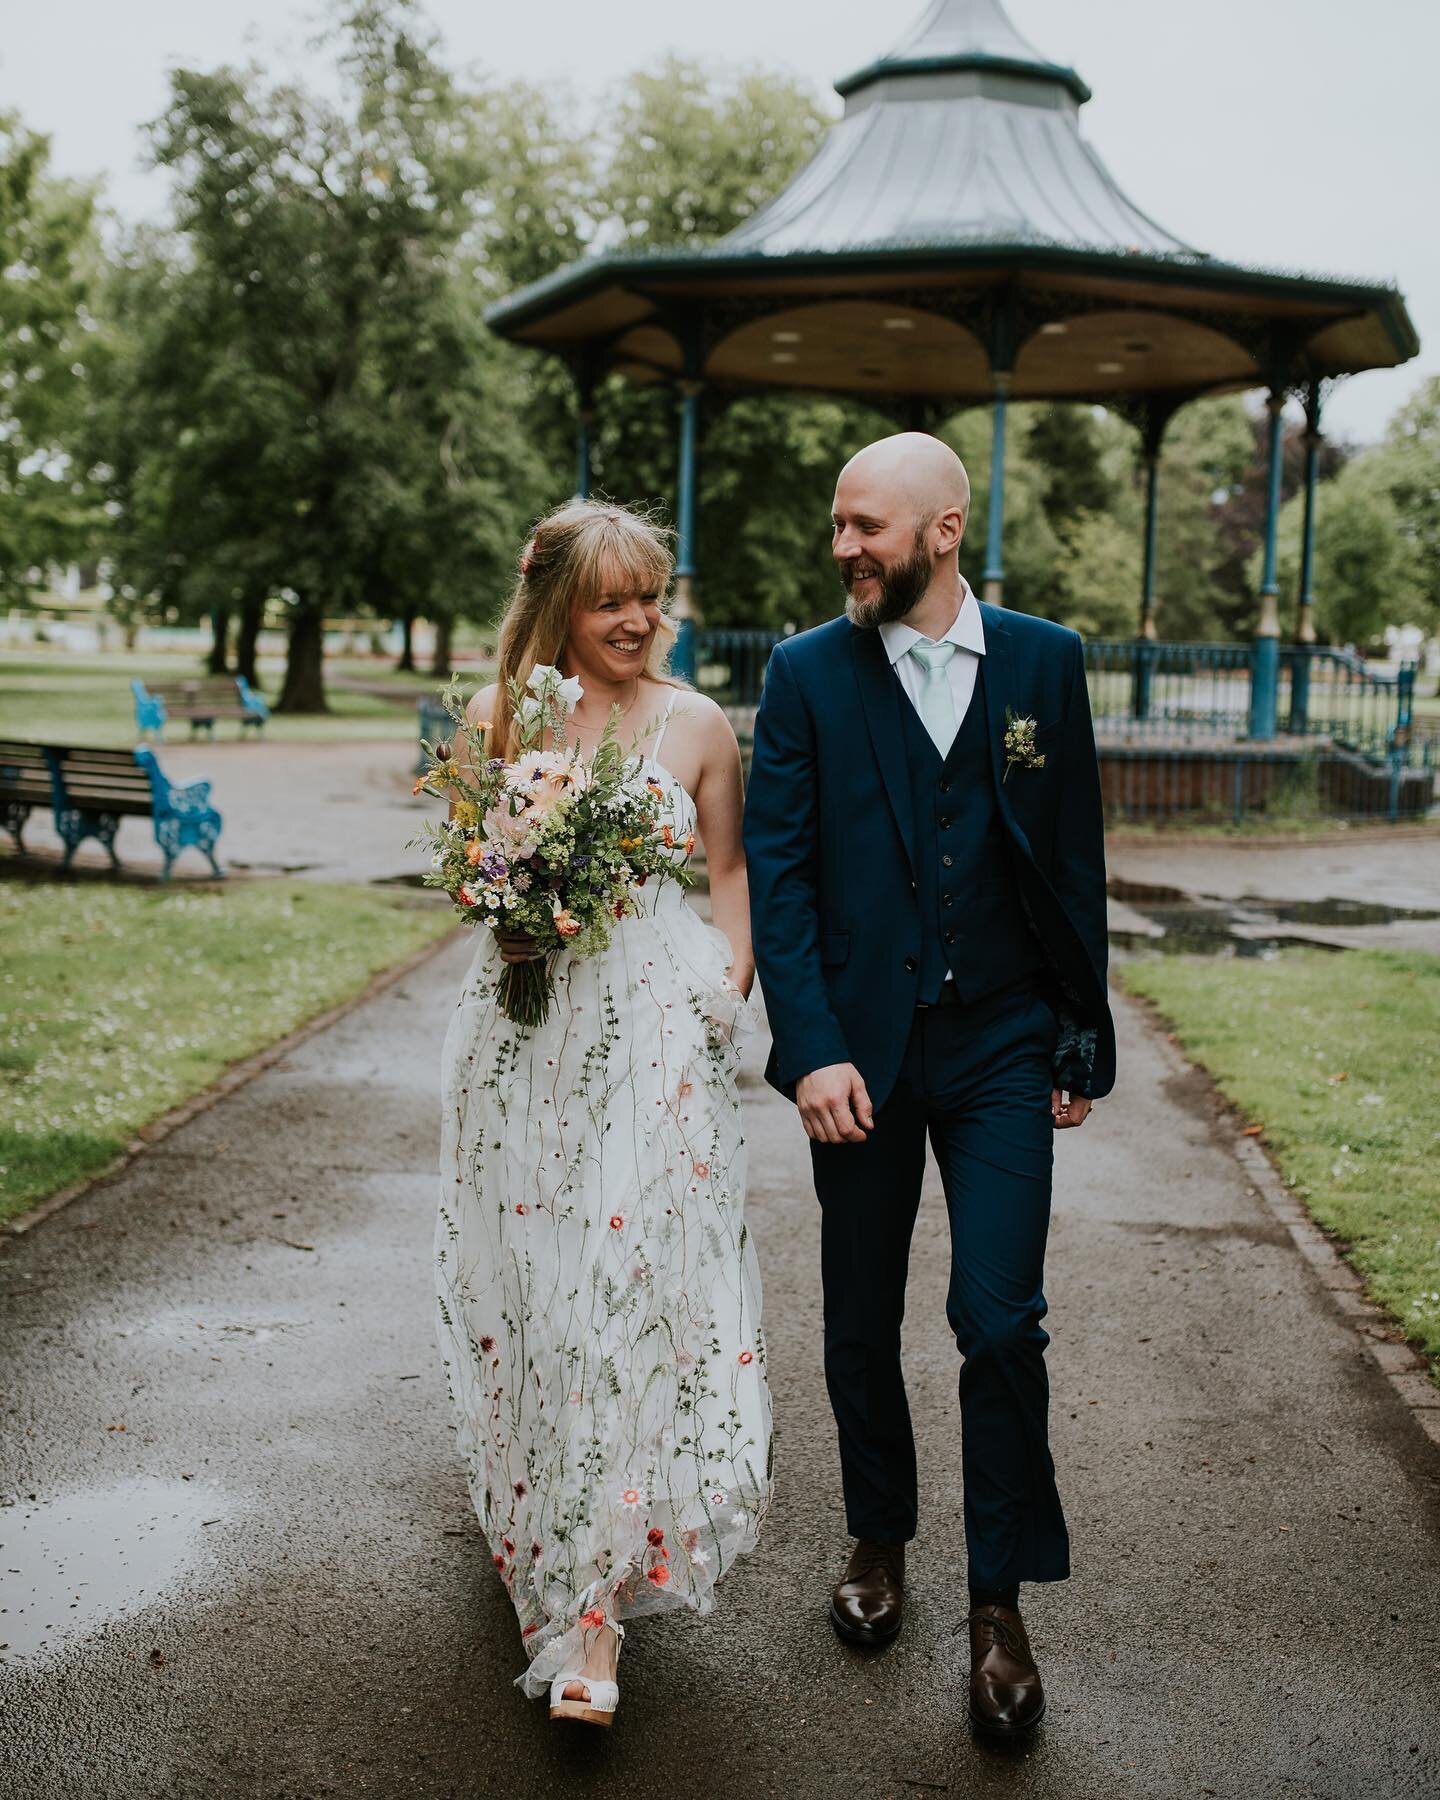 Get yourself a driver that parks inside of the park 💪

The rain held off last Saturday so we could get some couple portraits for these two ✨ 

#microwedding #marrynowpartylater #southwaleswedding #citywedding #ukweddingphotographer #chasinglight #ma